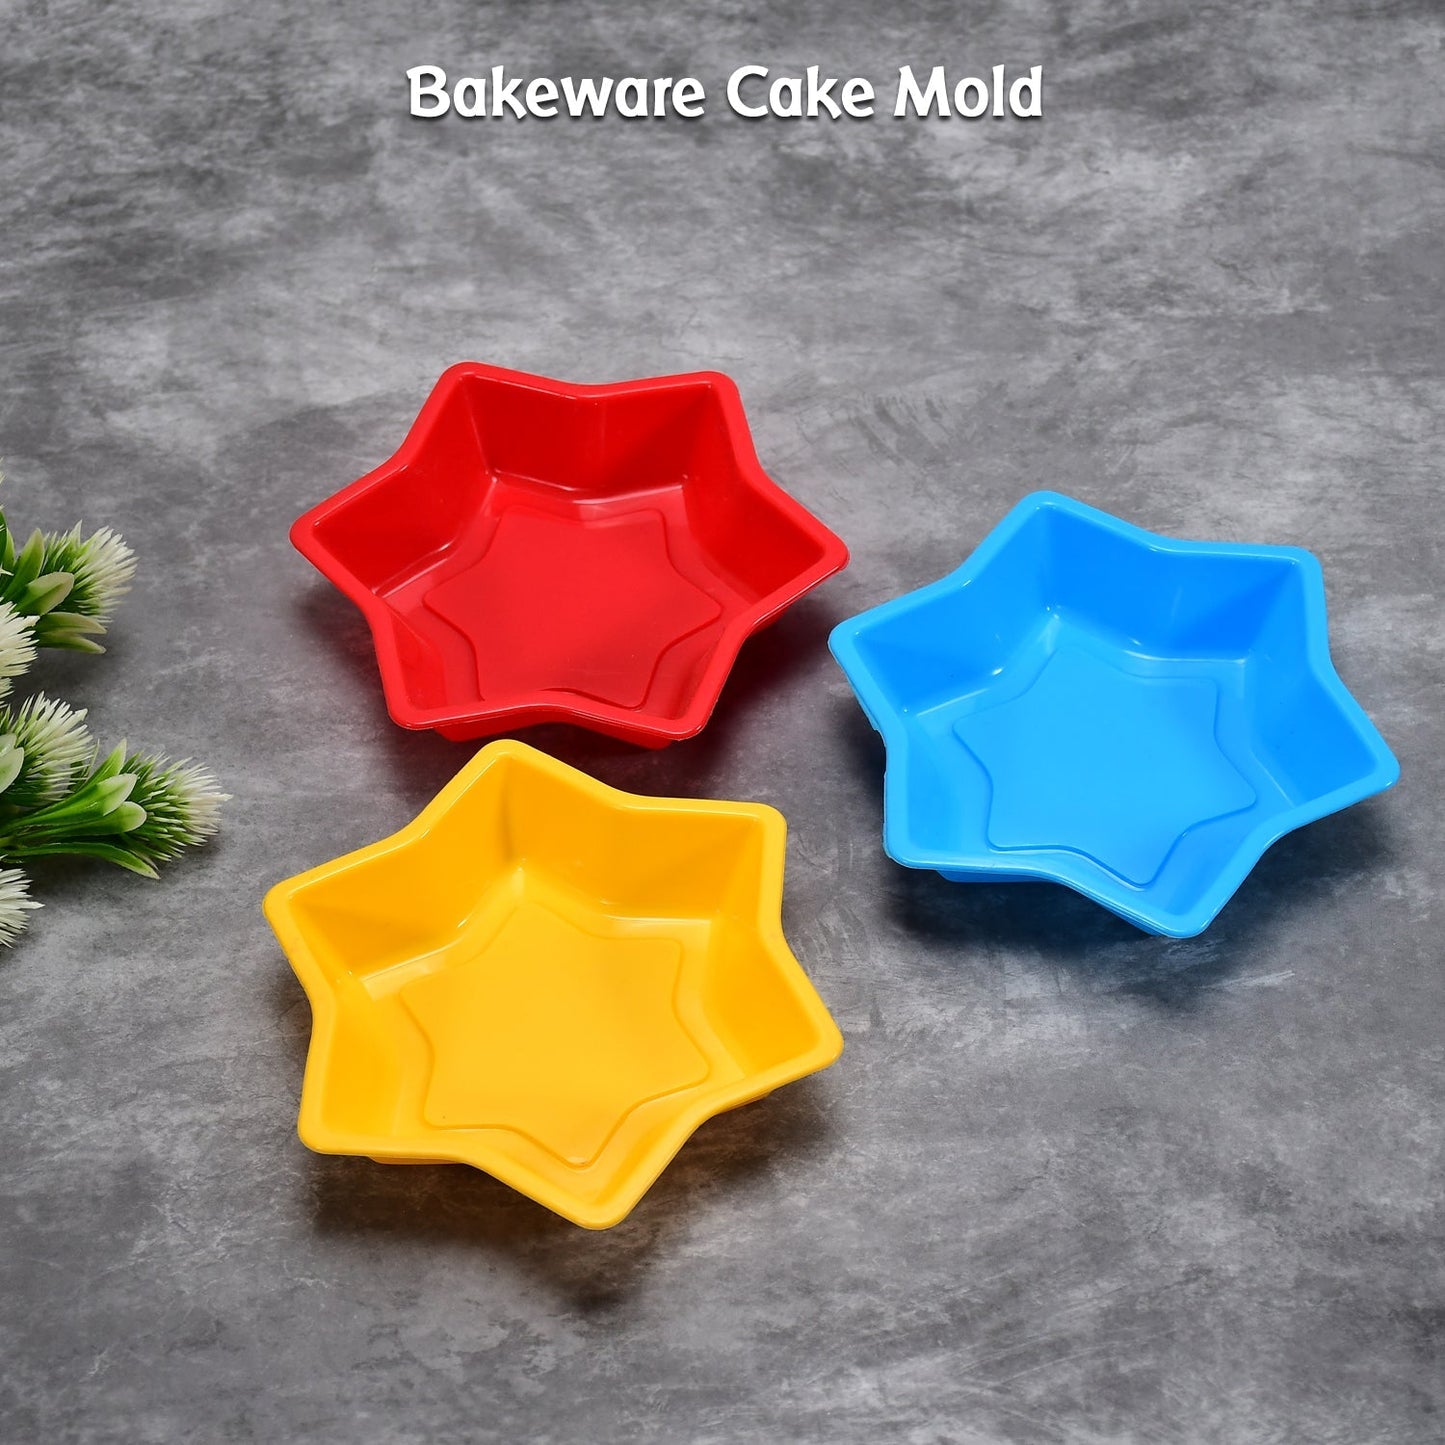 2726 MIX SHAPE CAKE CUP LINERS I SILICONE BAKING CUPS 